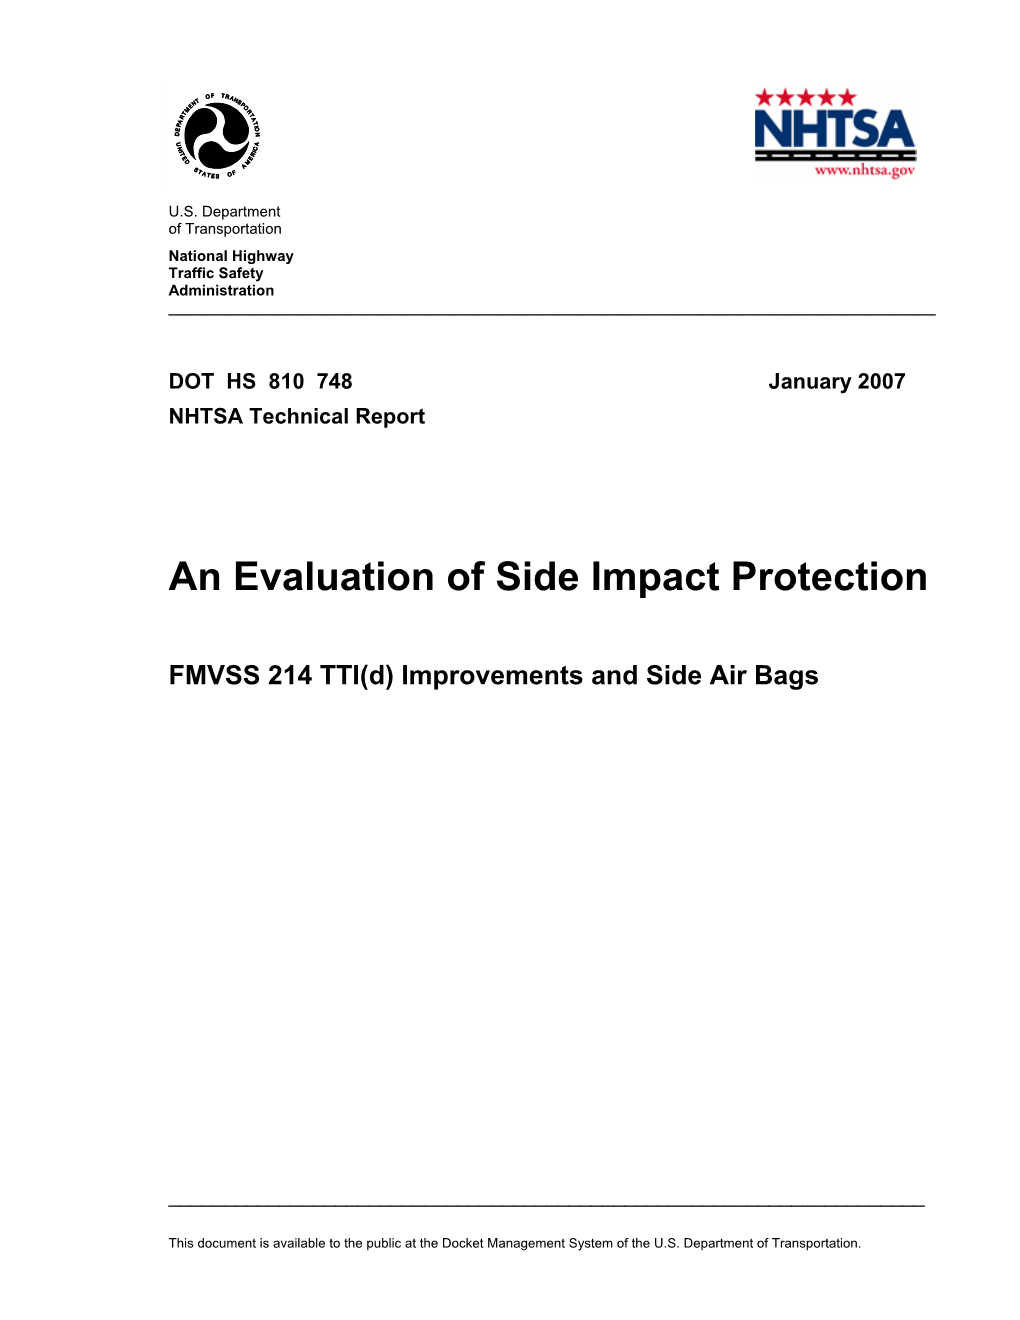 An Evaluation of Side Impact Protection